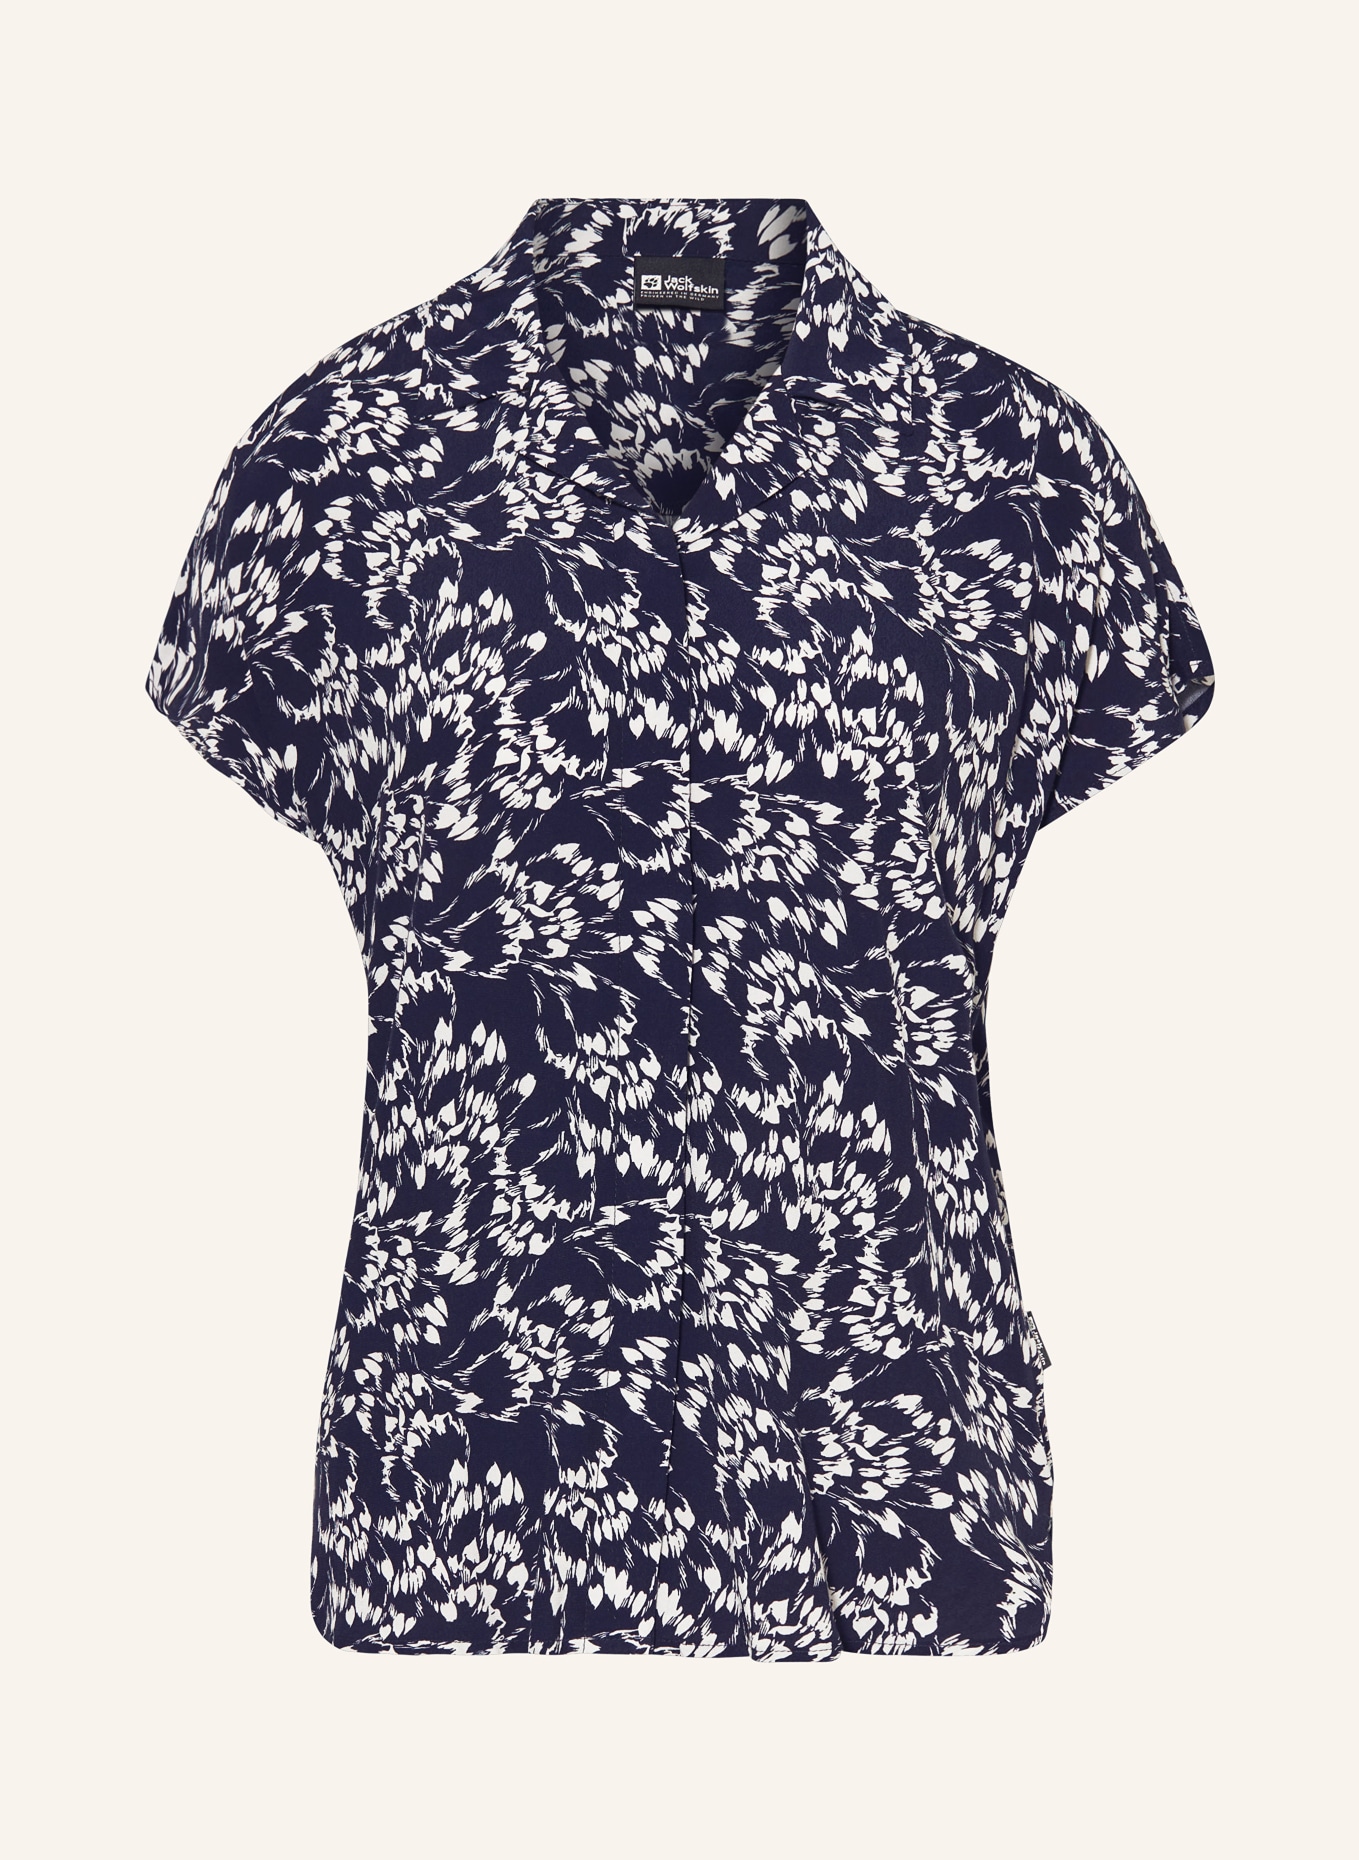 Jack Wolfskin Outdoor blouse SOMMERWIESE, Color: DARK BLUE/ WHITE (Image 1)